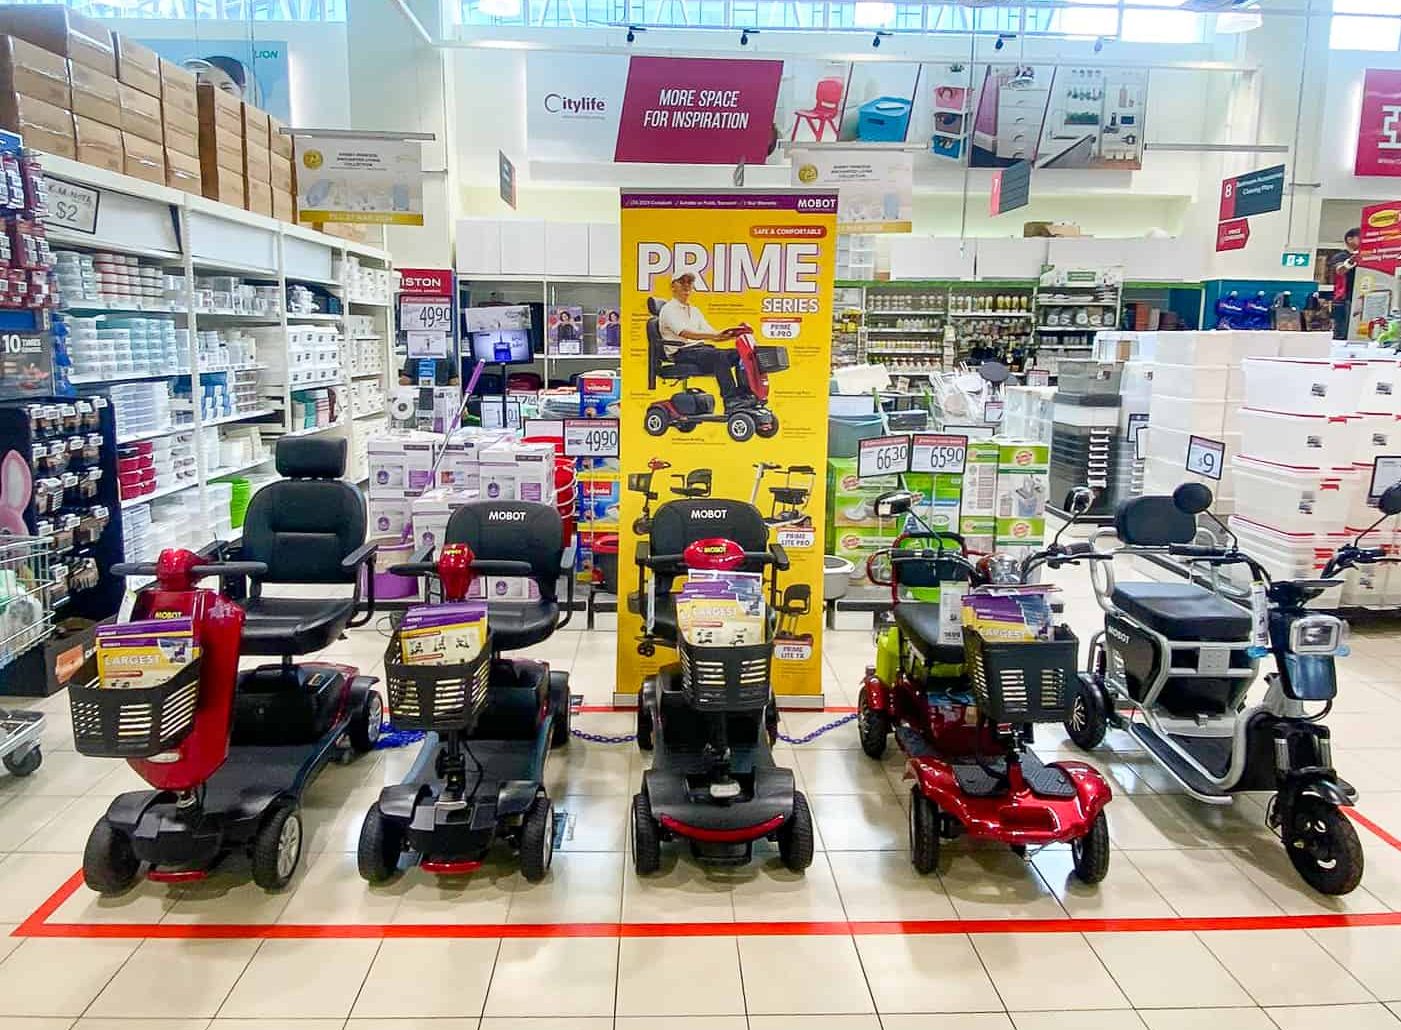 Prime series Mobot CBP e1709203901704 - Press release: MOBOT’s PMA series is now available at FairPrice Xtra (Changi Business Park)